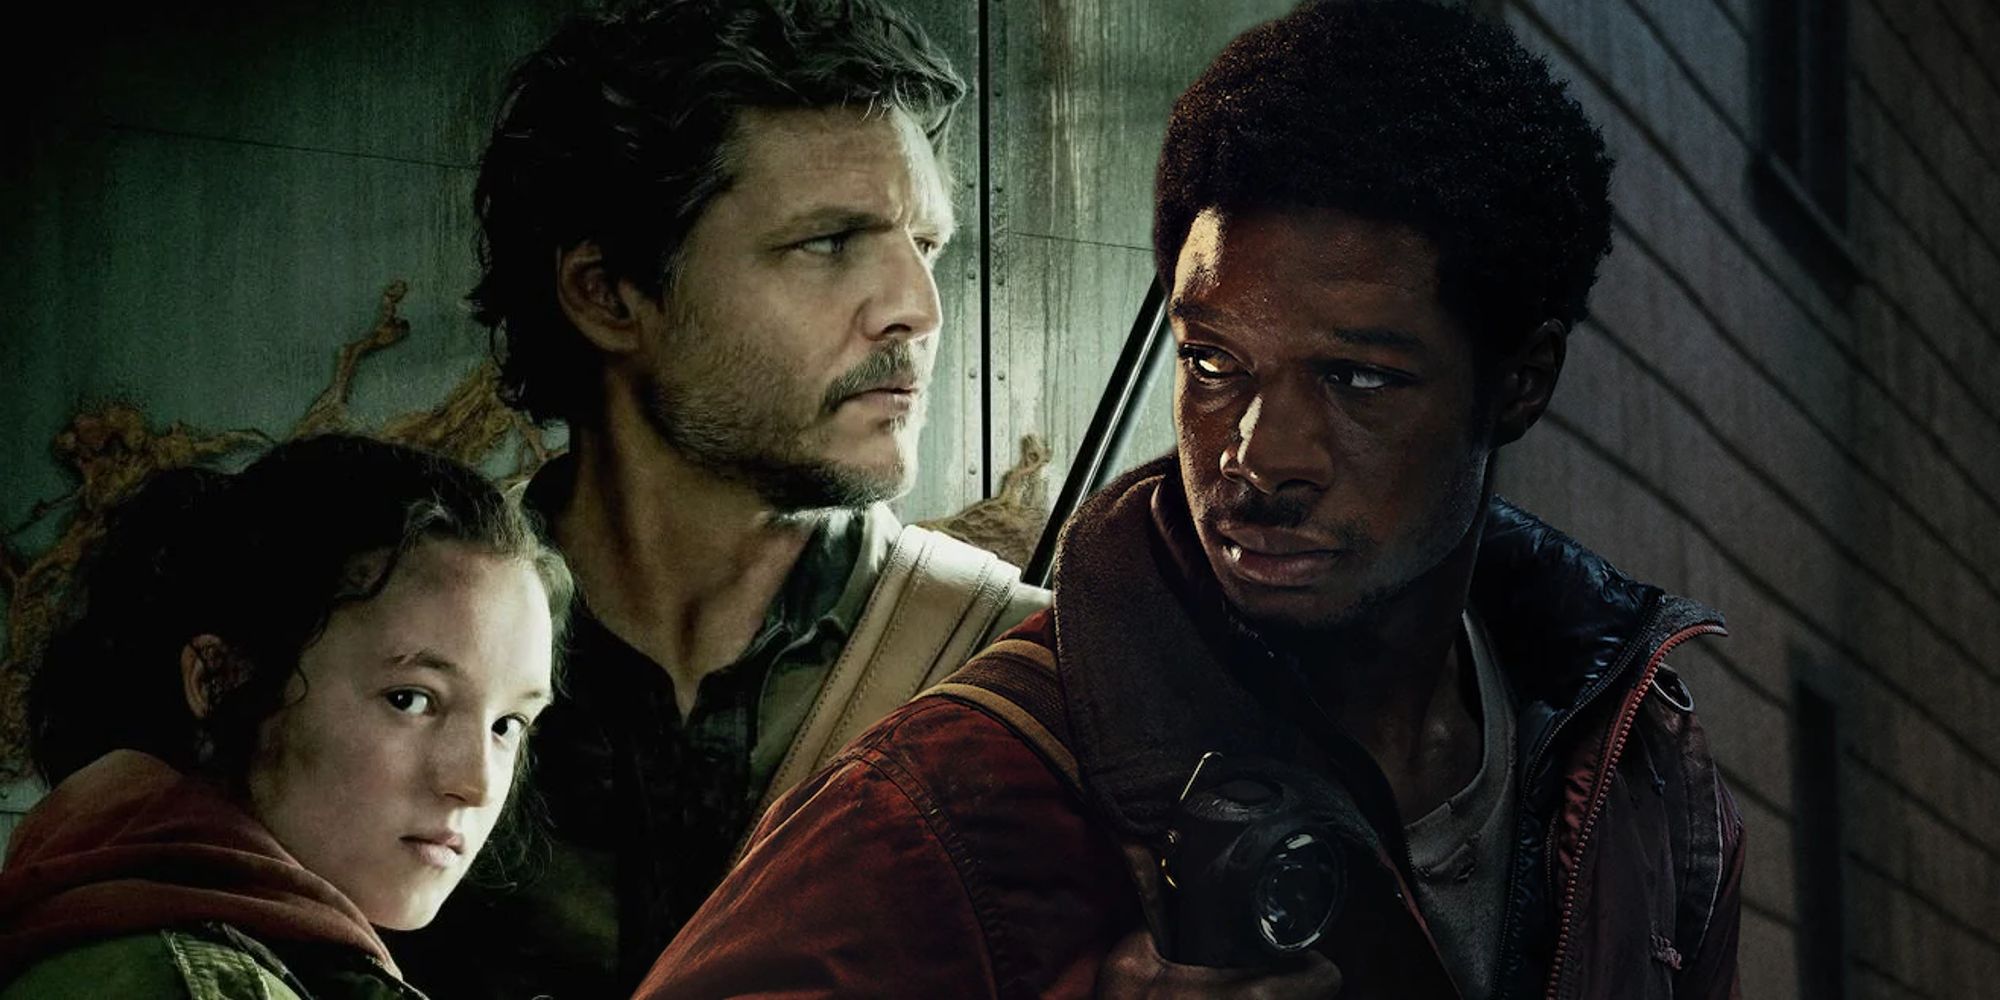 Pedro Pascal as Joel, Bella Ramsey as Ellie, and Lamar Johnson as Henry in their Last of Us character posters